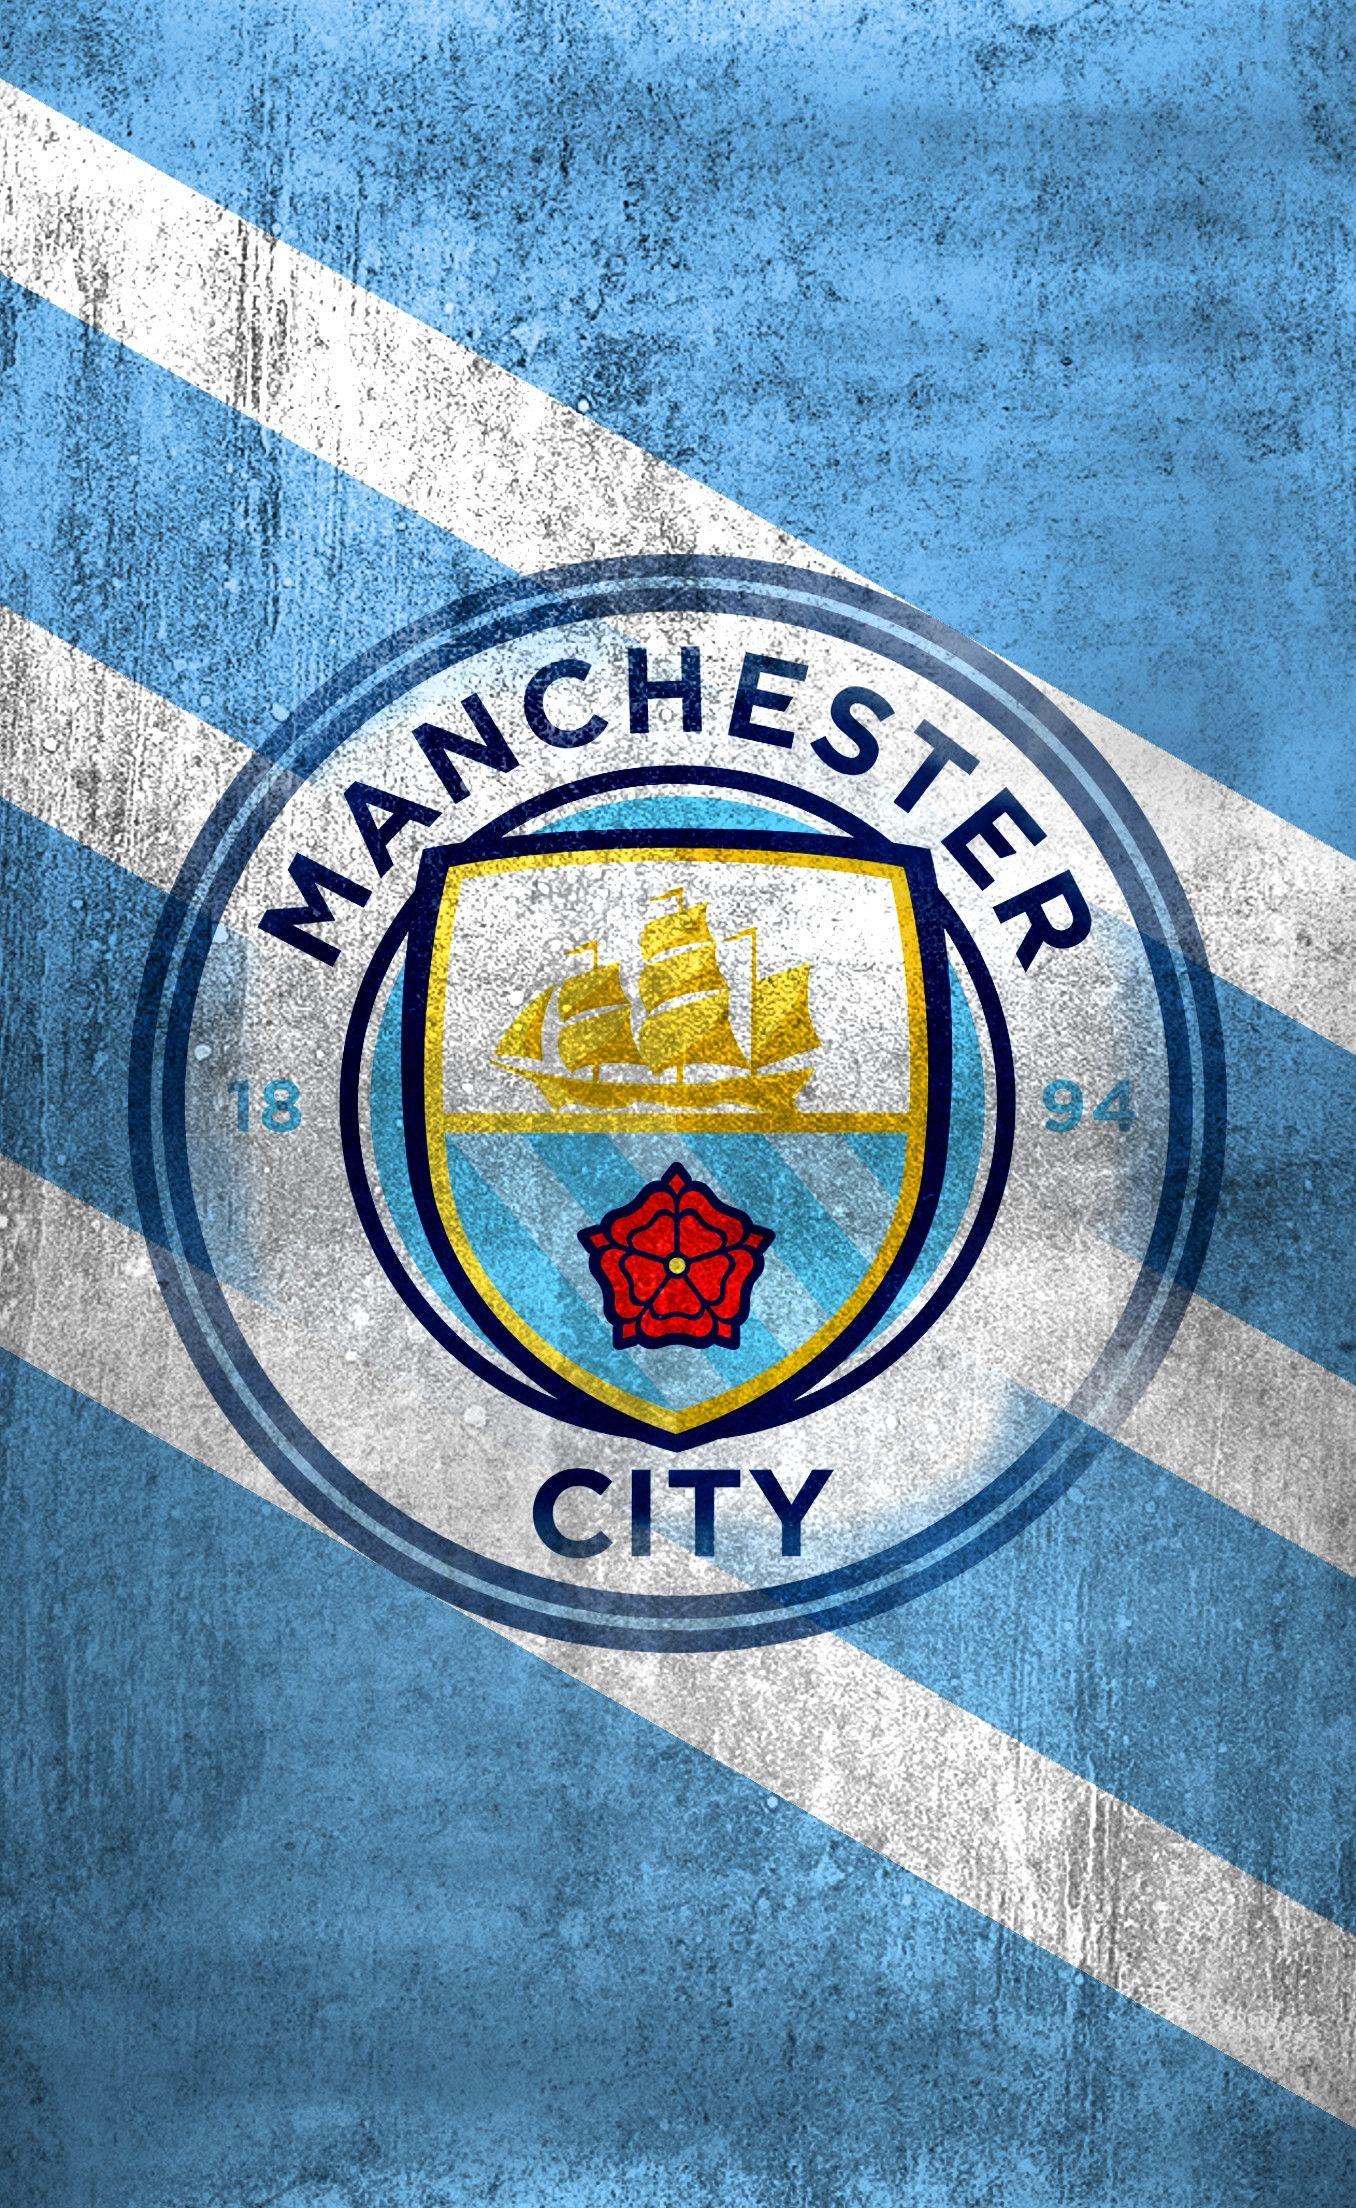 Manchester City logo 256×256 picture free download